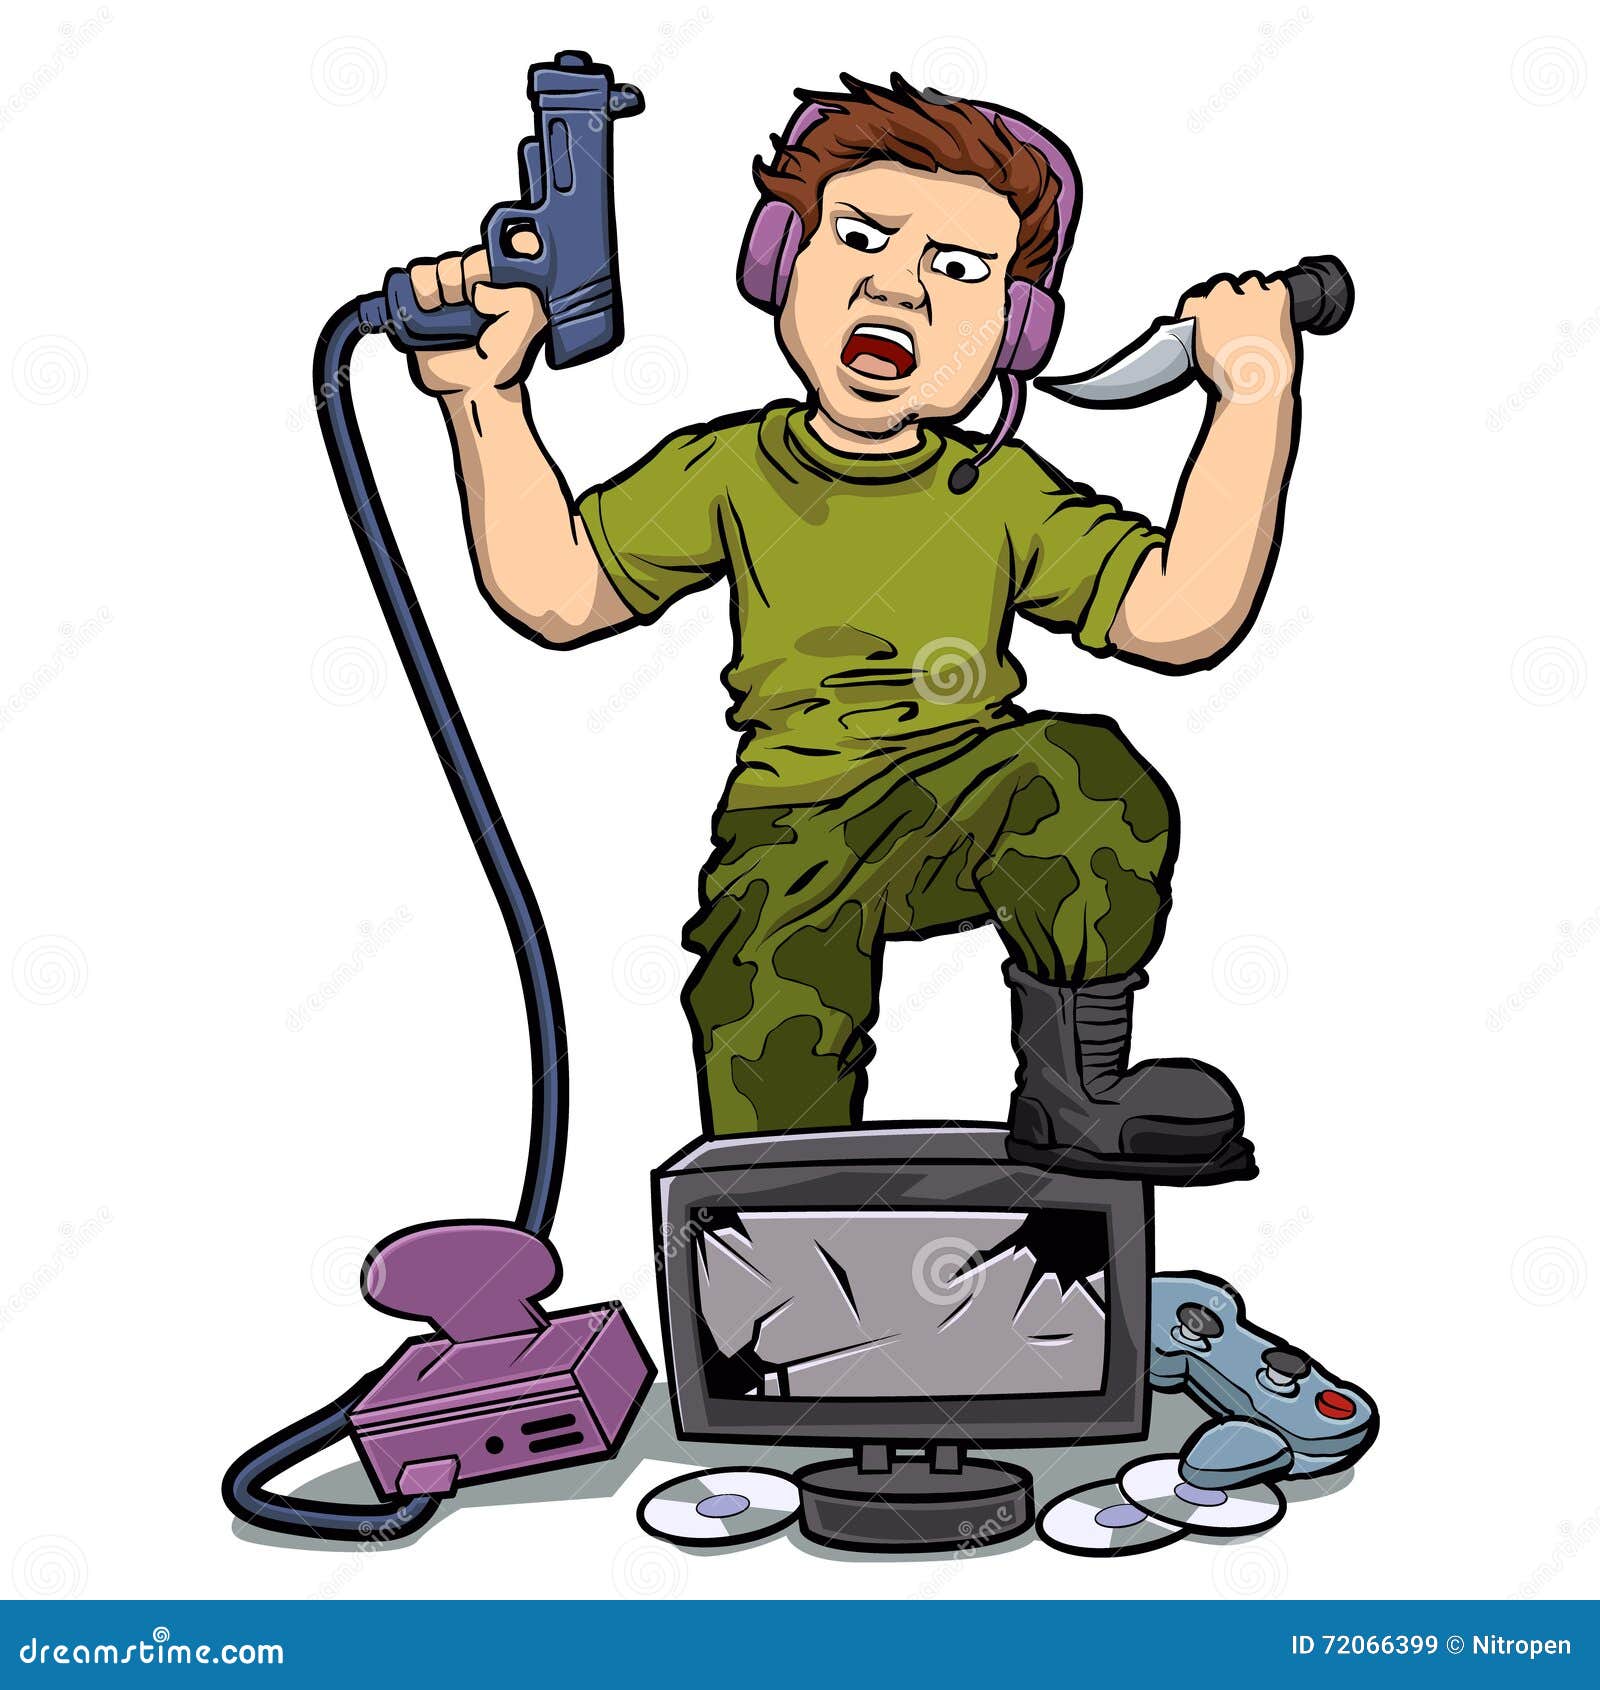 person playing video games clipart - photo #29